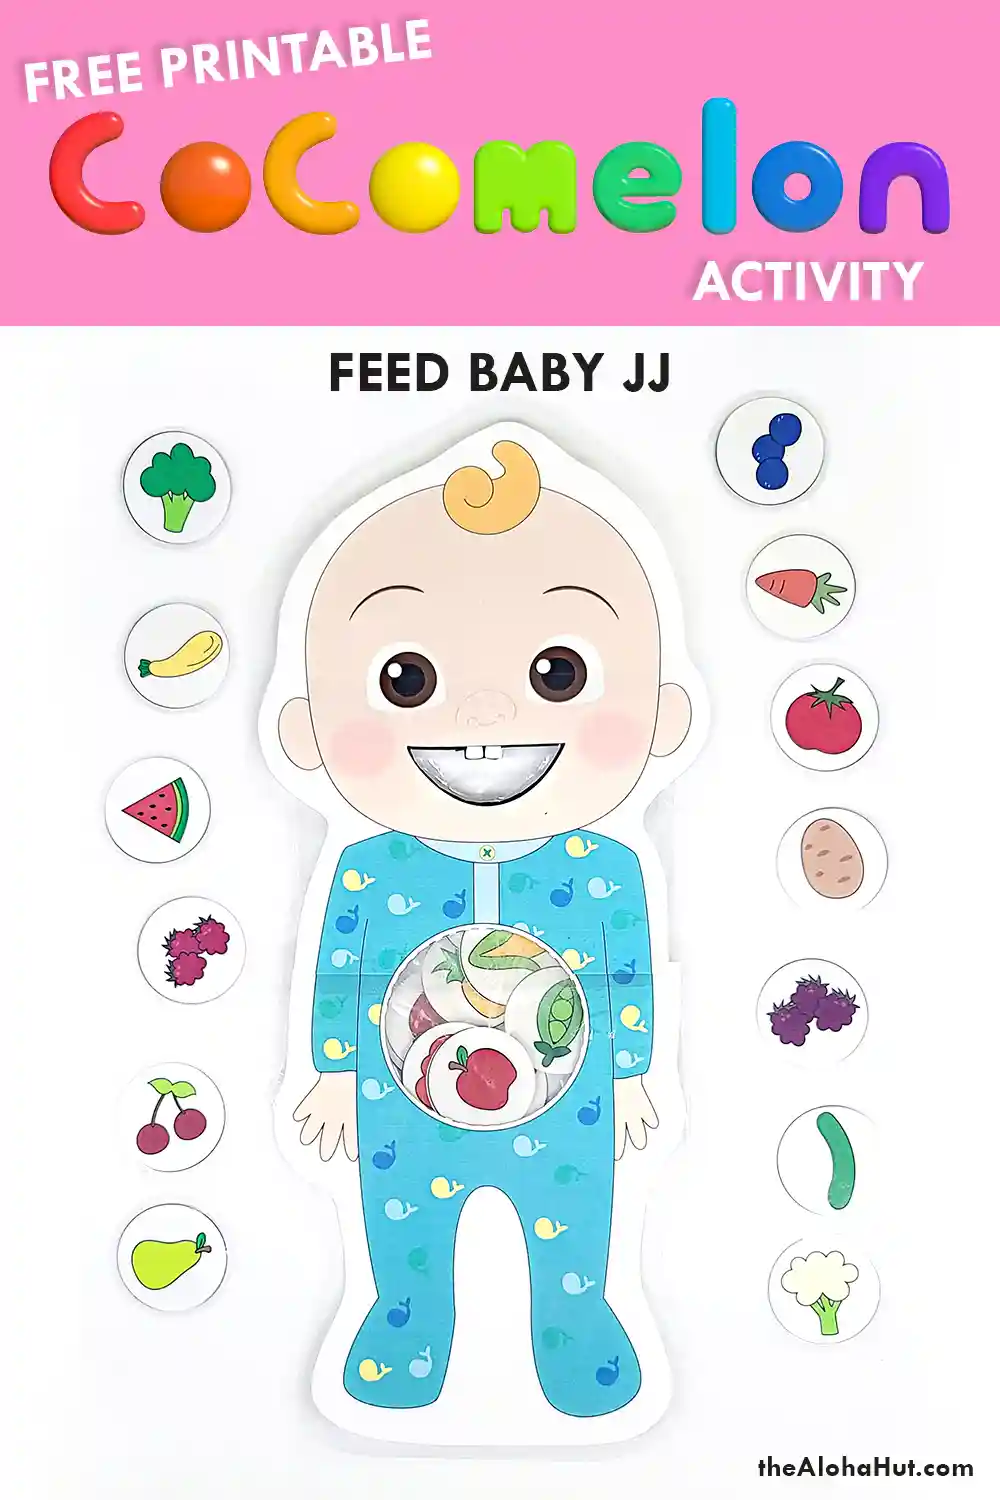 https://thealohahut.com/wp-content/uploads/2023/08/cocomelon-feed-baby-JJ-activity-free-printable-by-the-Aloha-Hut.webp